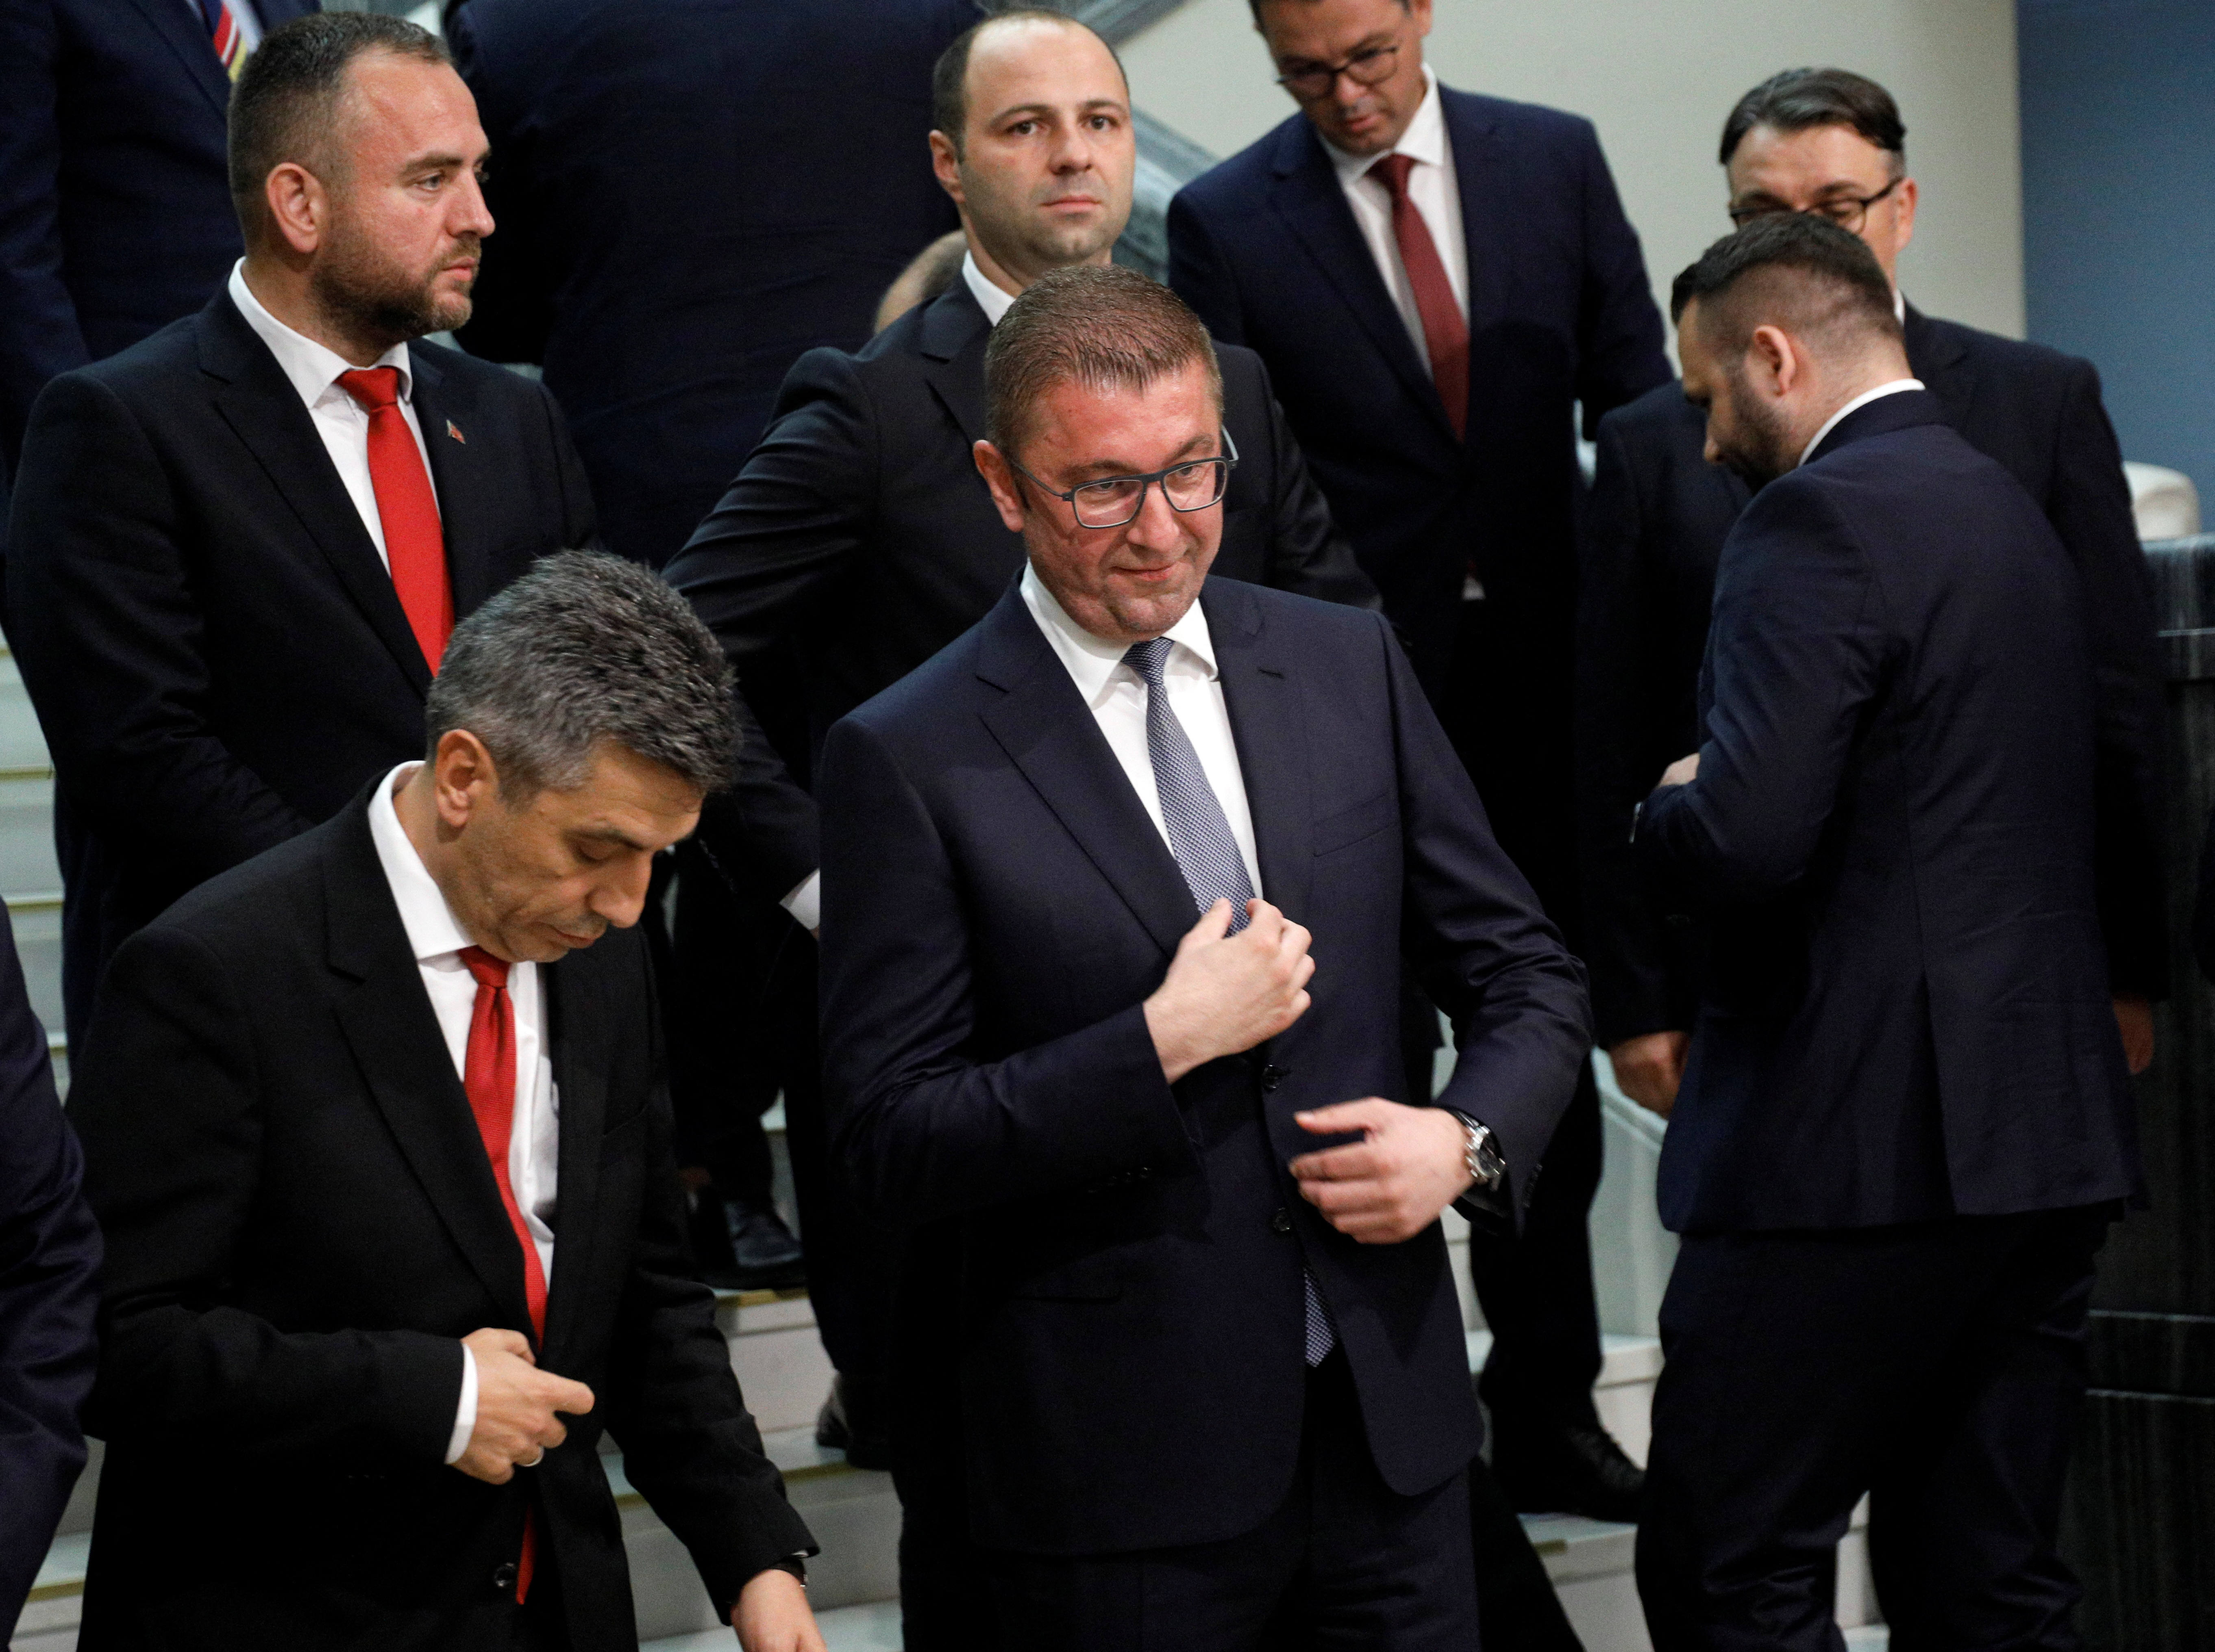 Hristijan Mickoski leader of the ruling VMRO party poses for a picture with newly elected ministers at the Macedonian parliament in Skopje